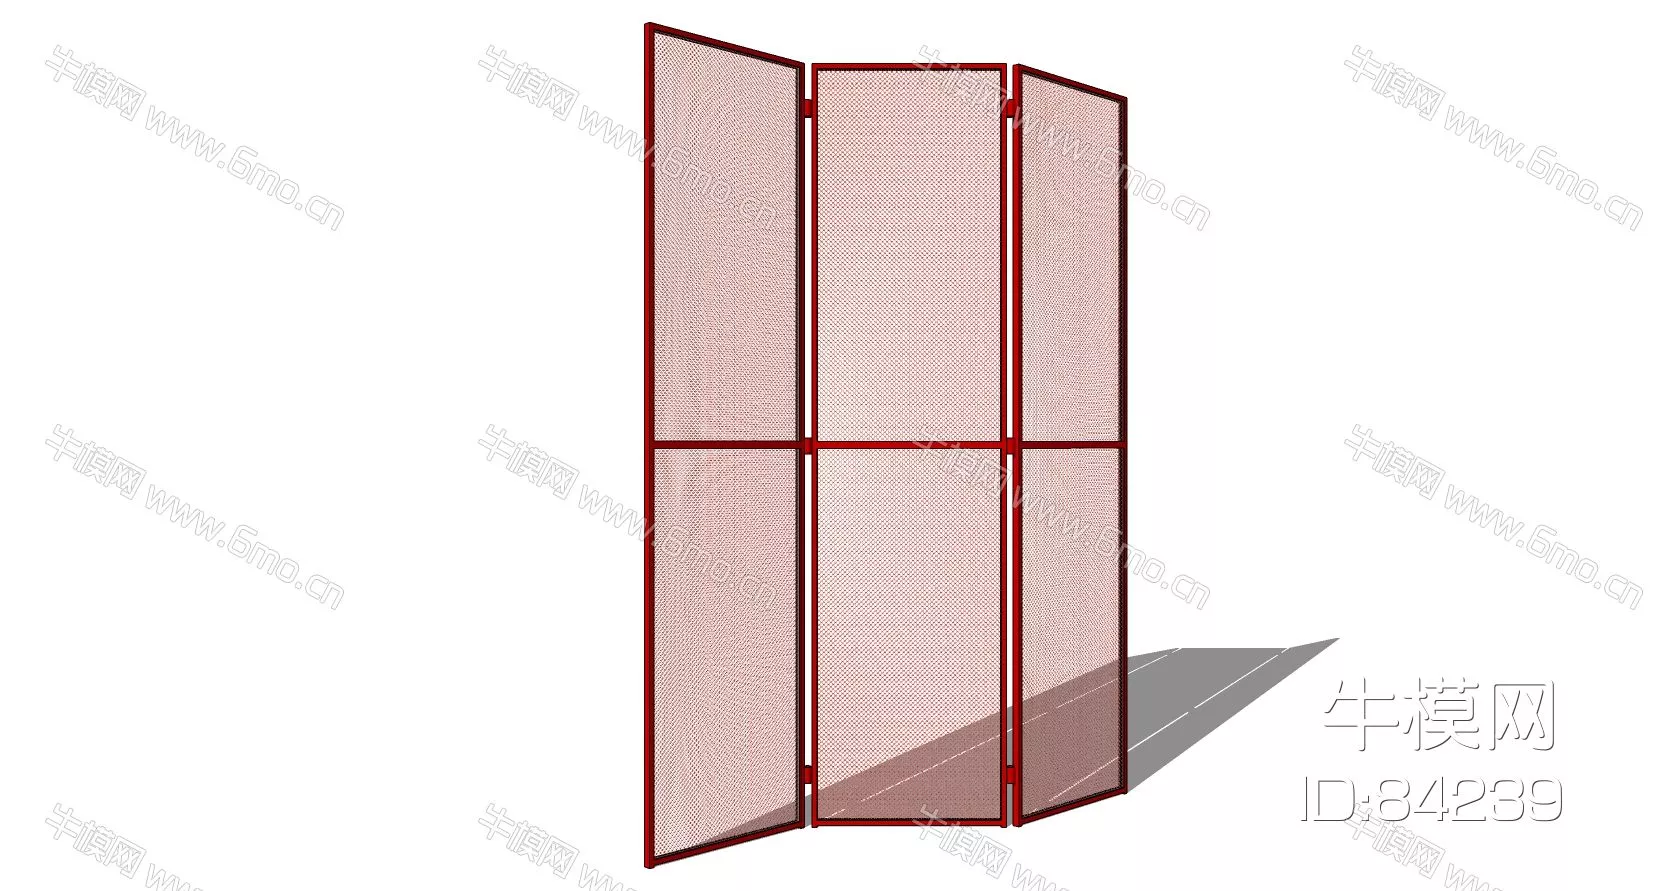 CHINESE PARTITION SCREEN - SKETCHUP 3D MODEL - ENSCAPE - 84239